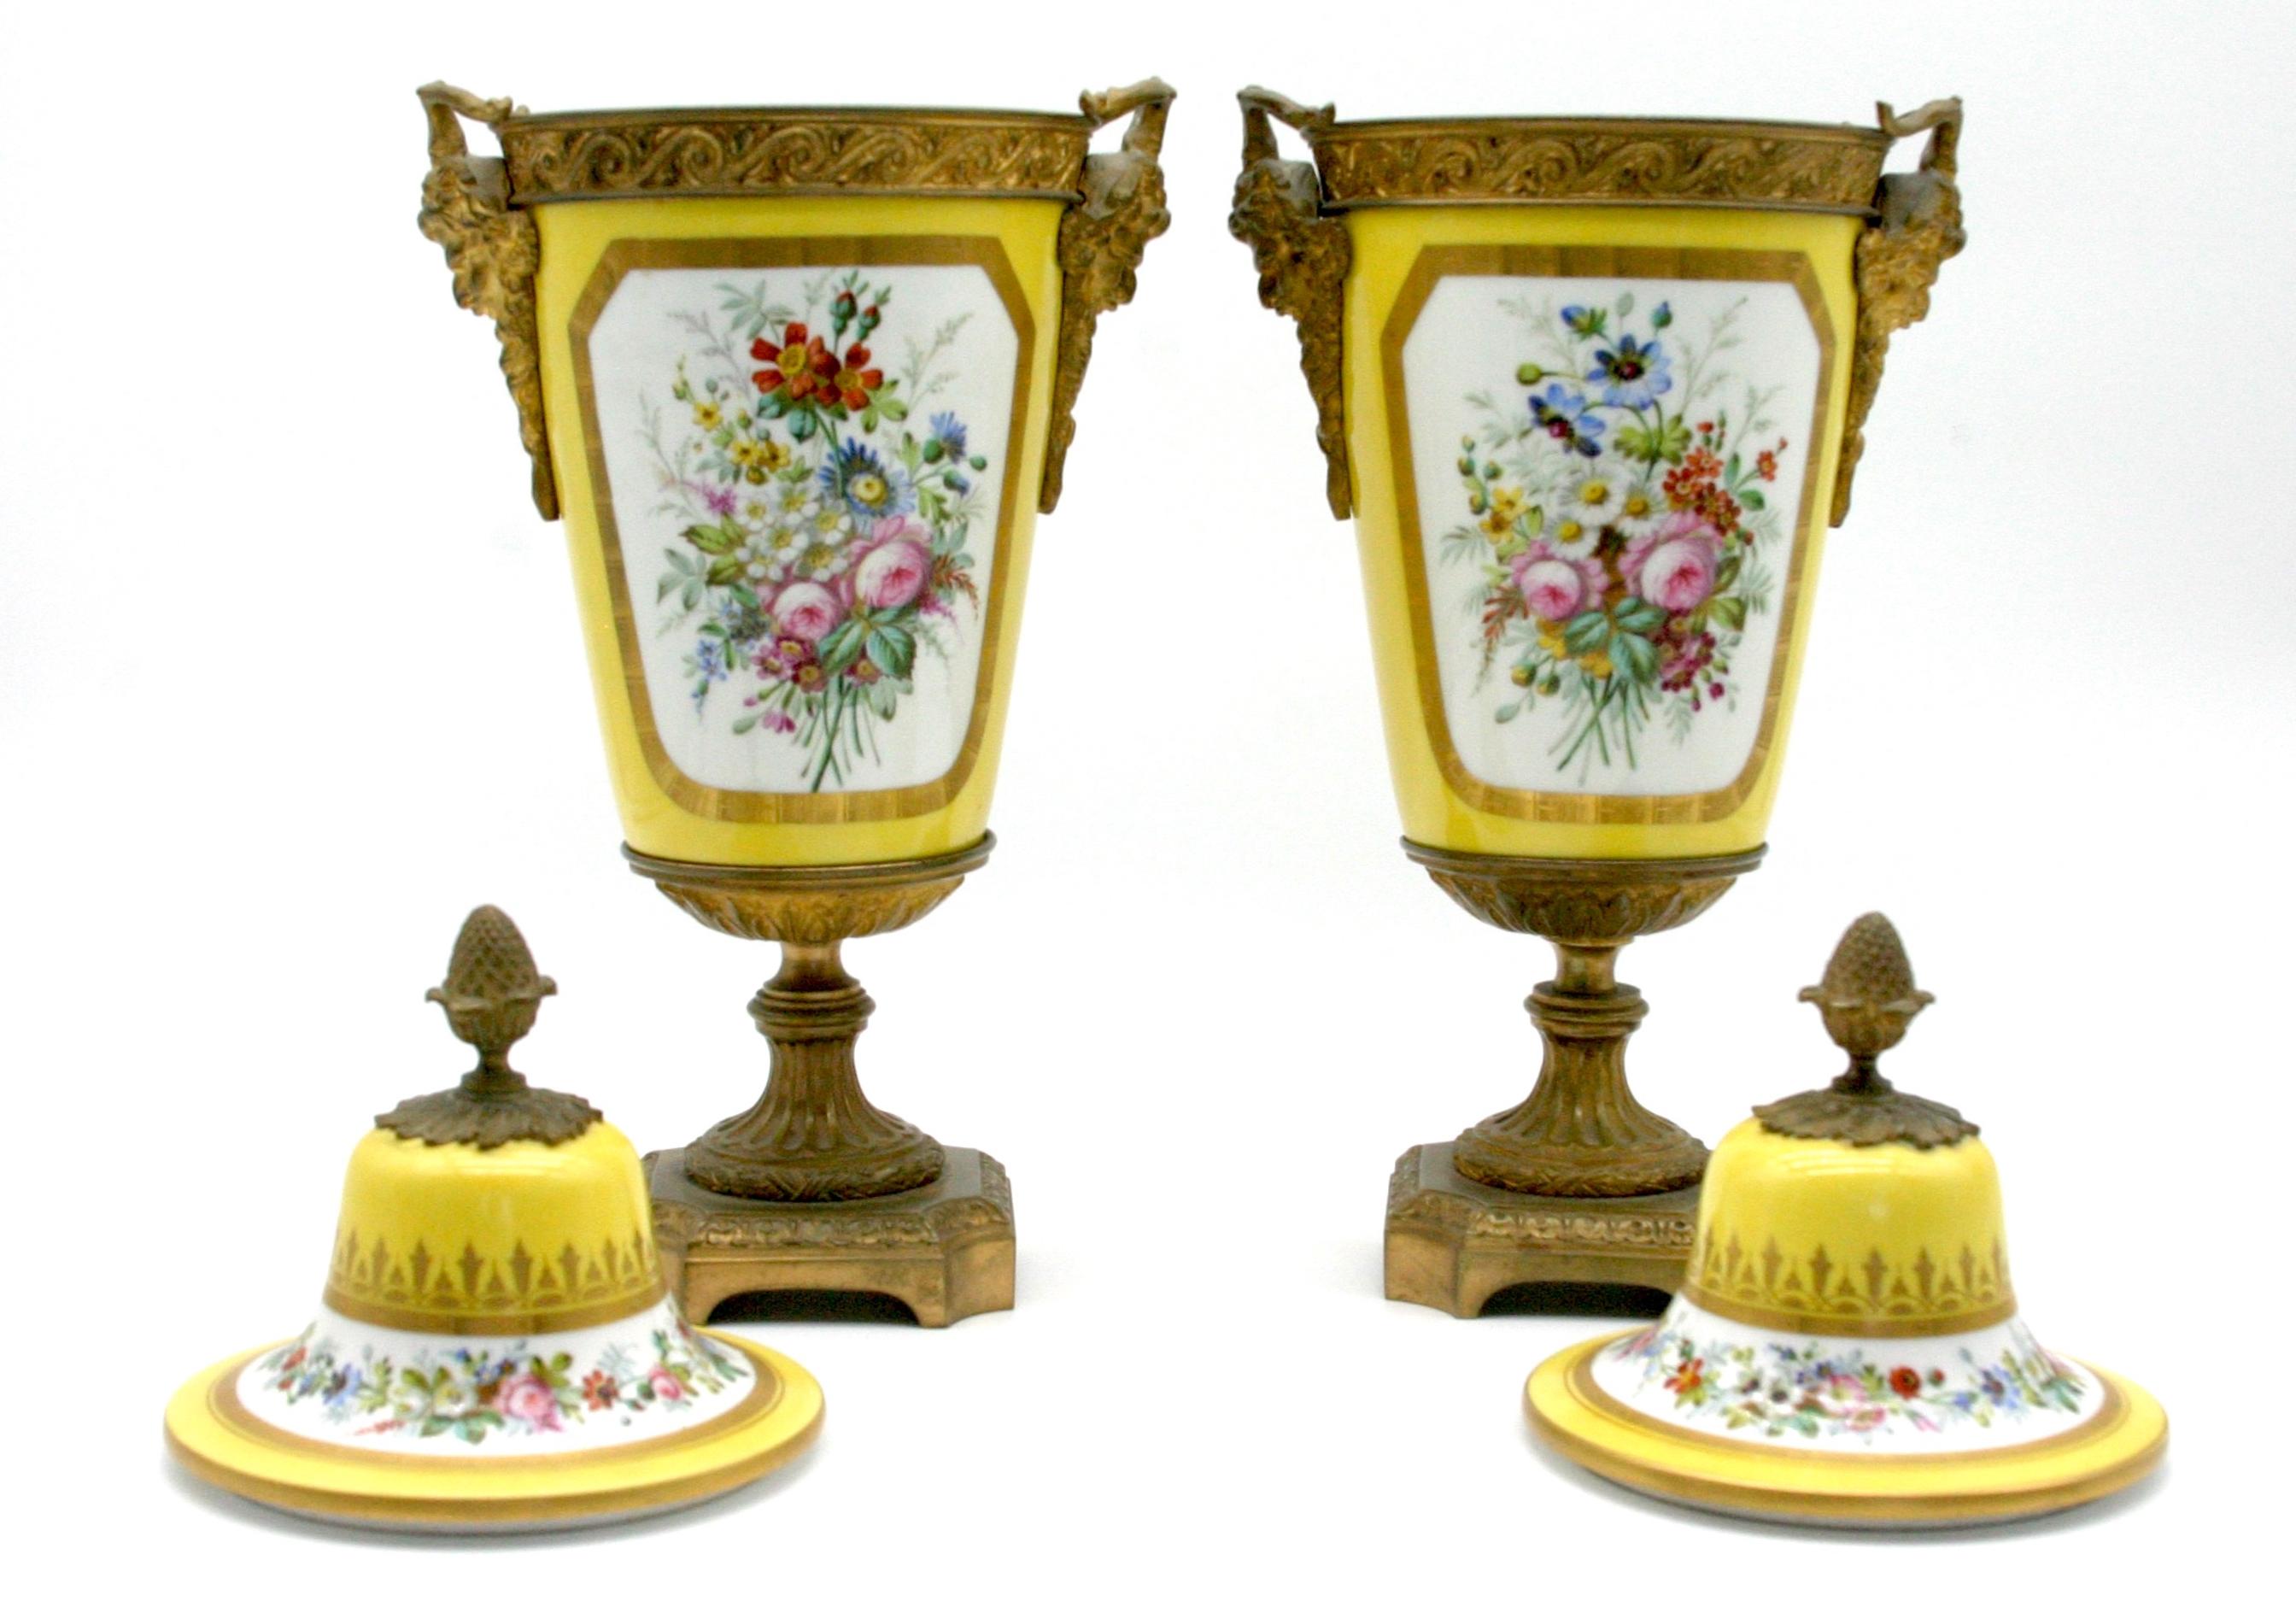 19th Century bronze mounted pair porcelain decorative urns with exterior hand painted romantic scene and floral details. Artist signature 